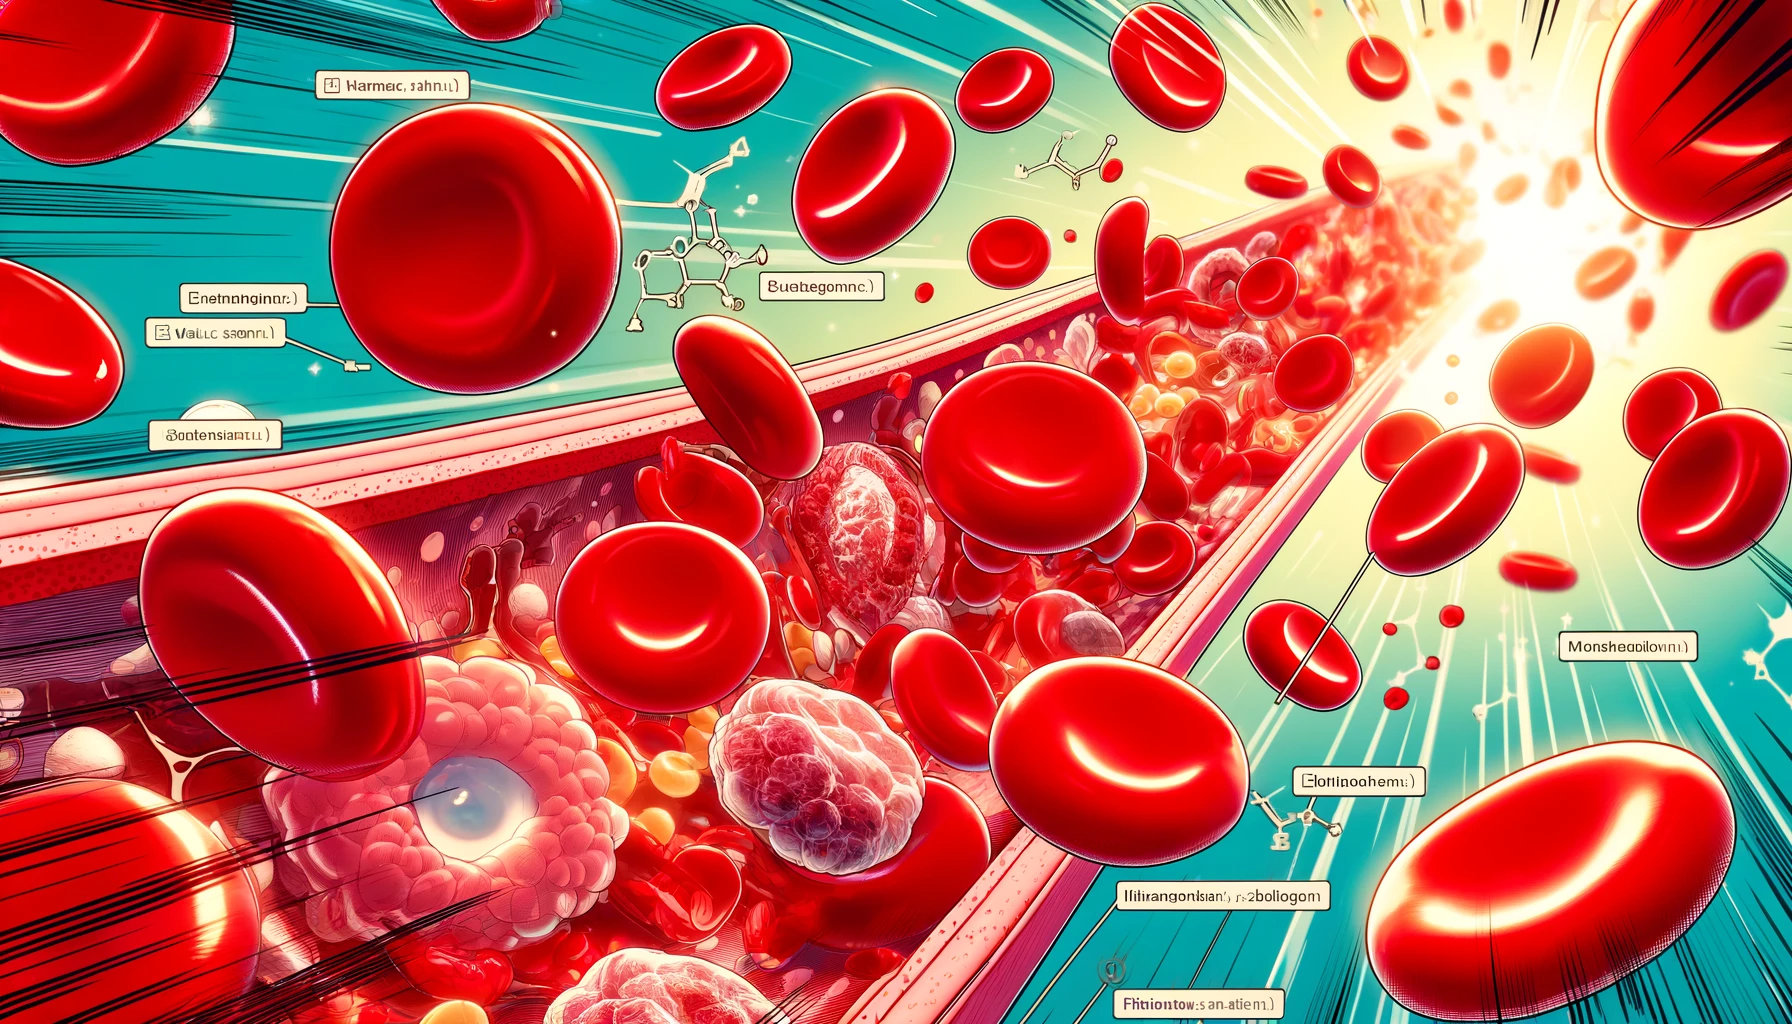 Scientists discover blood proteins that may give cancer warning 7 years before diagnosis